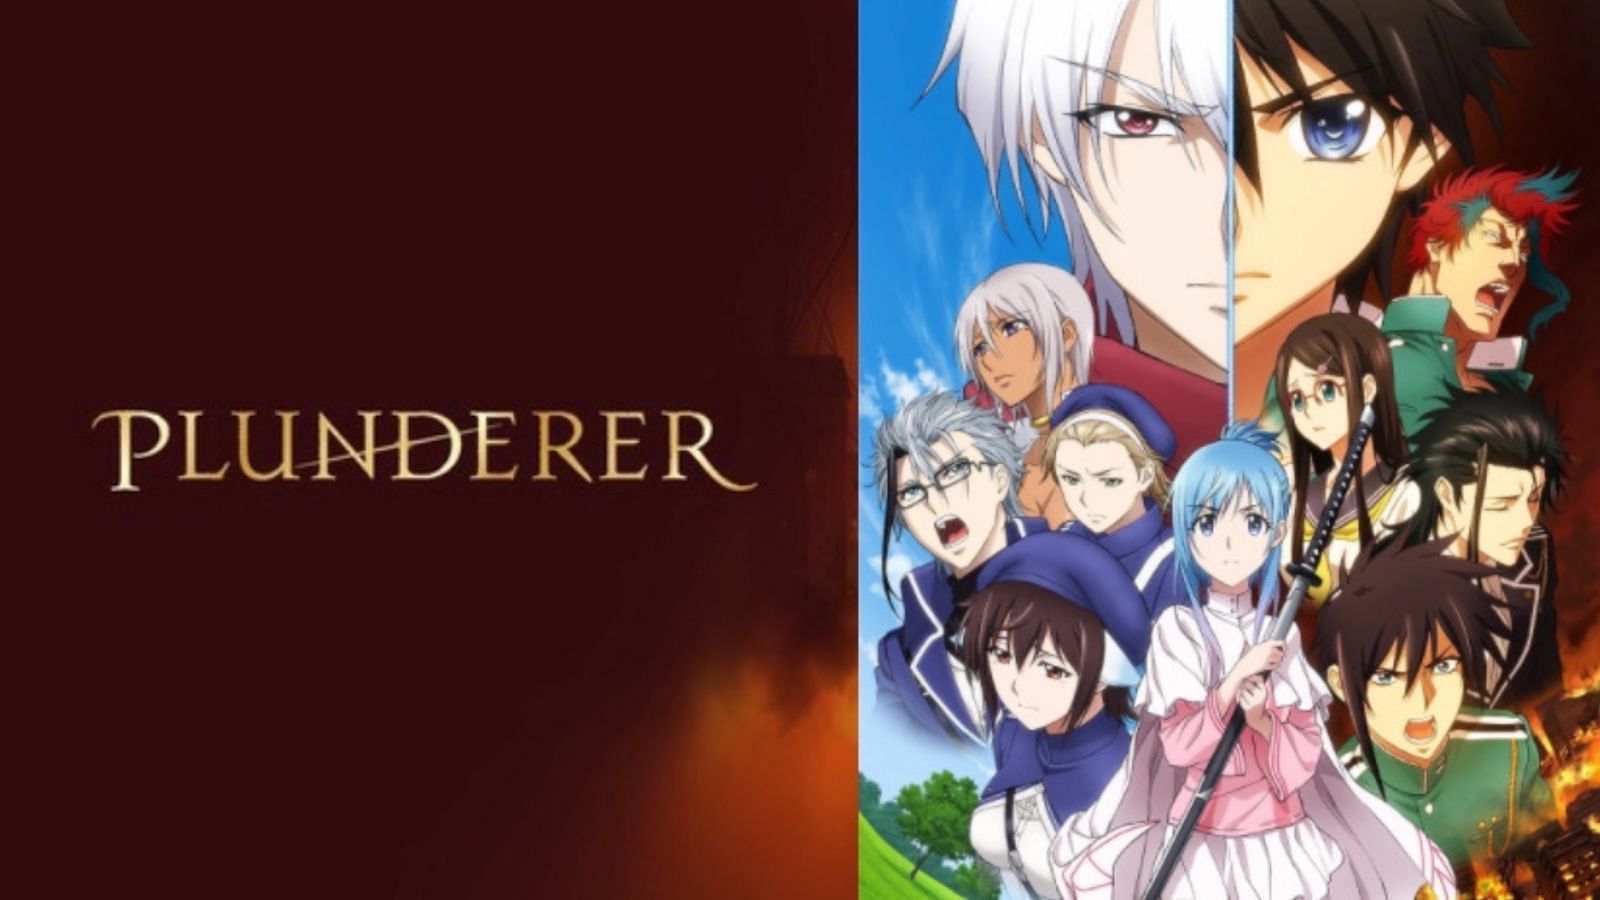 5 More Cast Members Added by Anime Plunderer